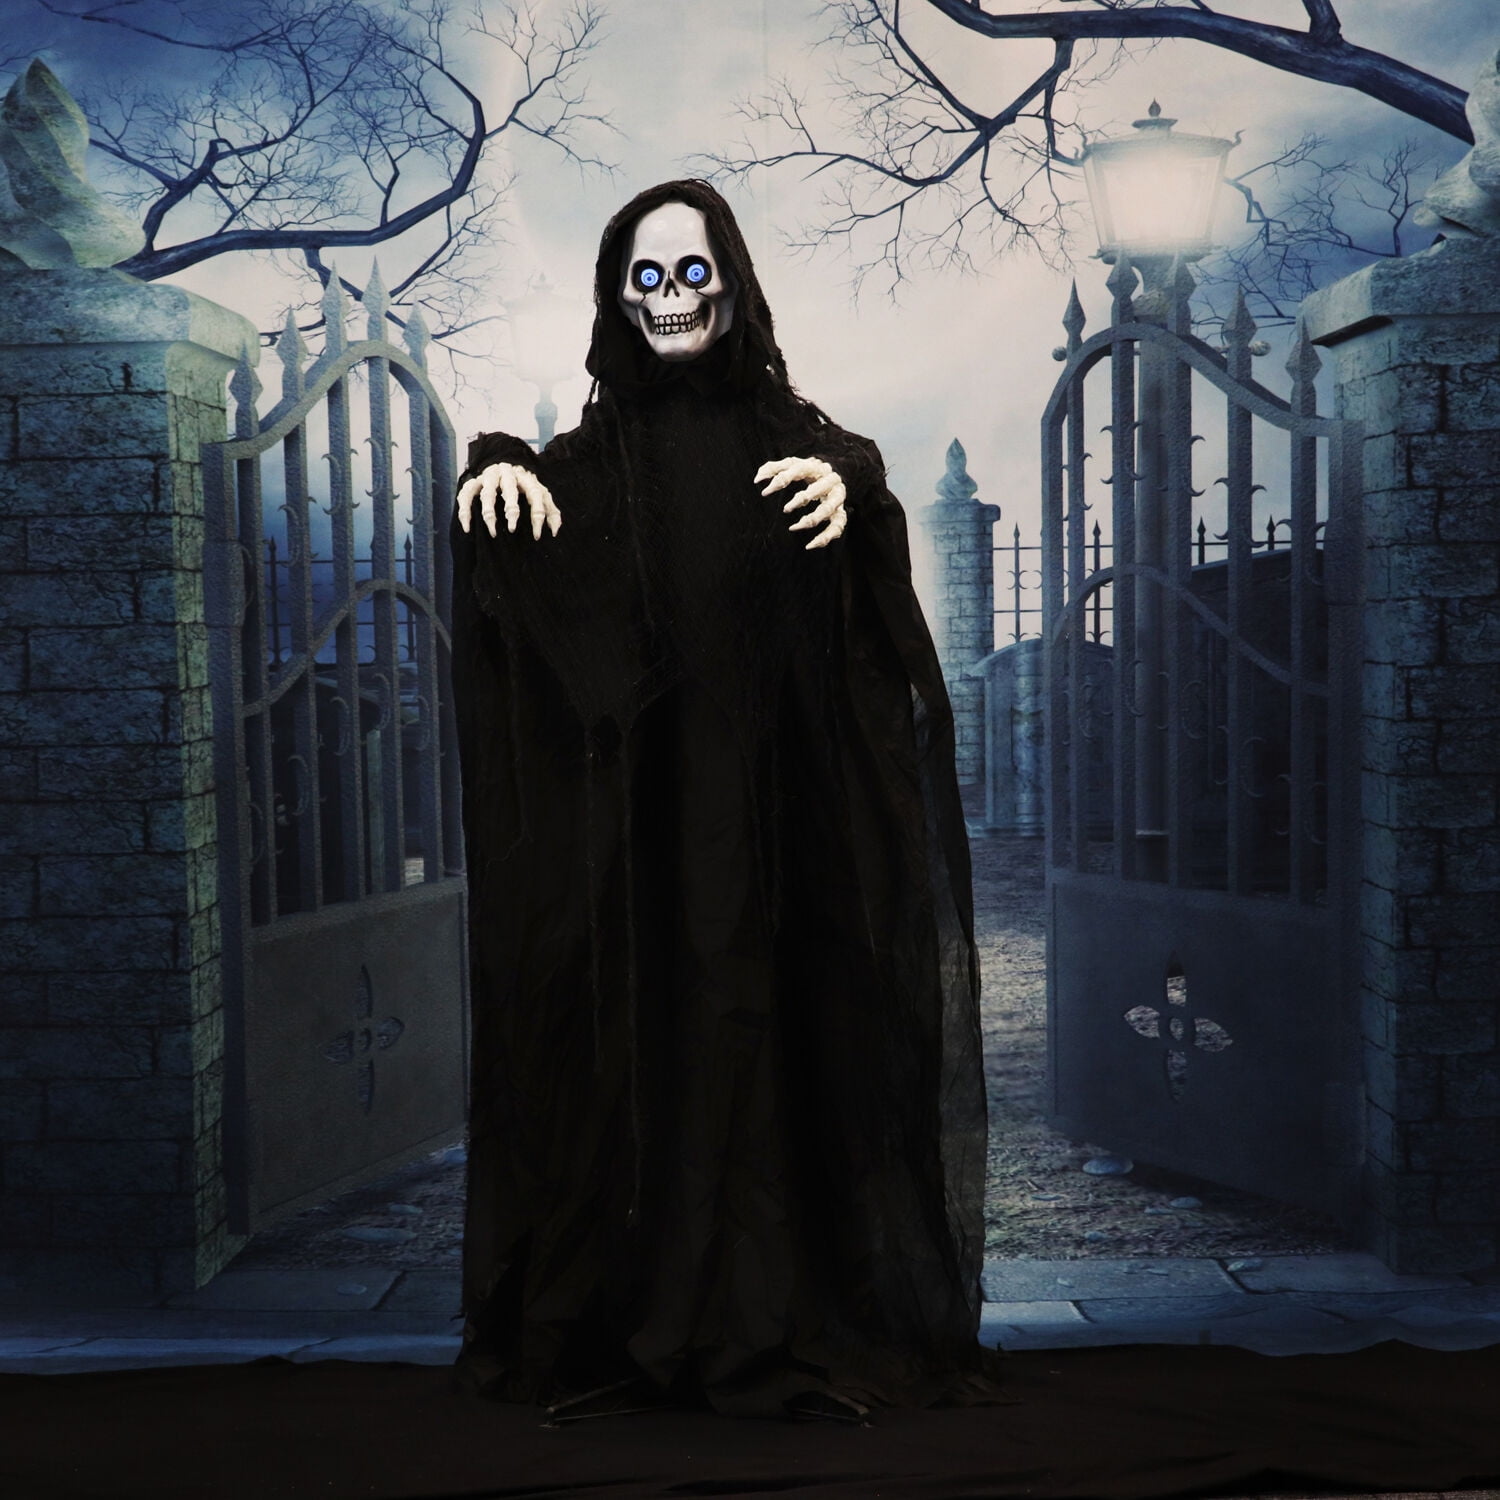 Haunted Hill Farm 5-Ft. Shakey the Animated Reaching Reaper